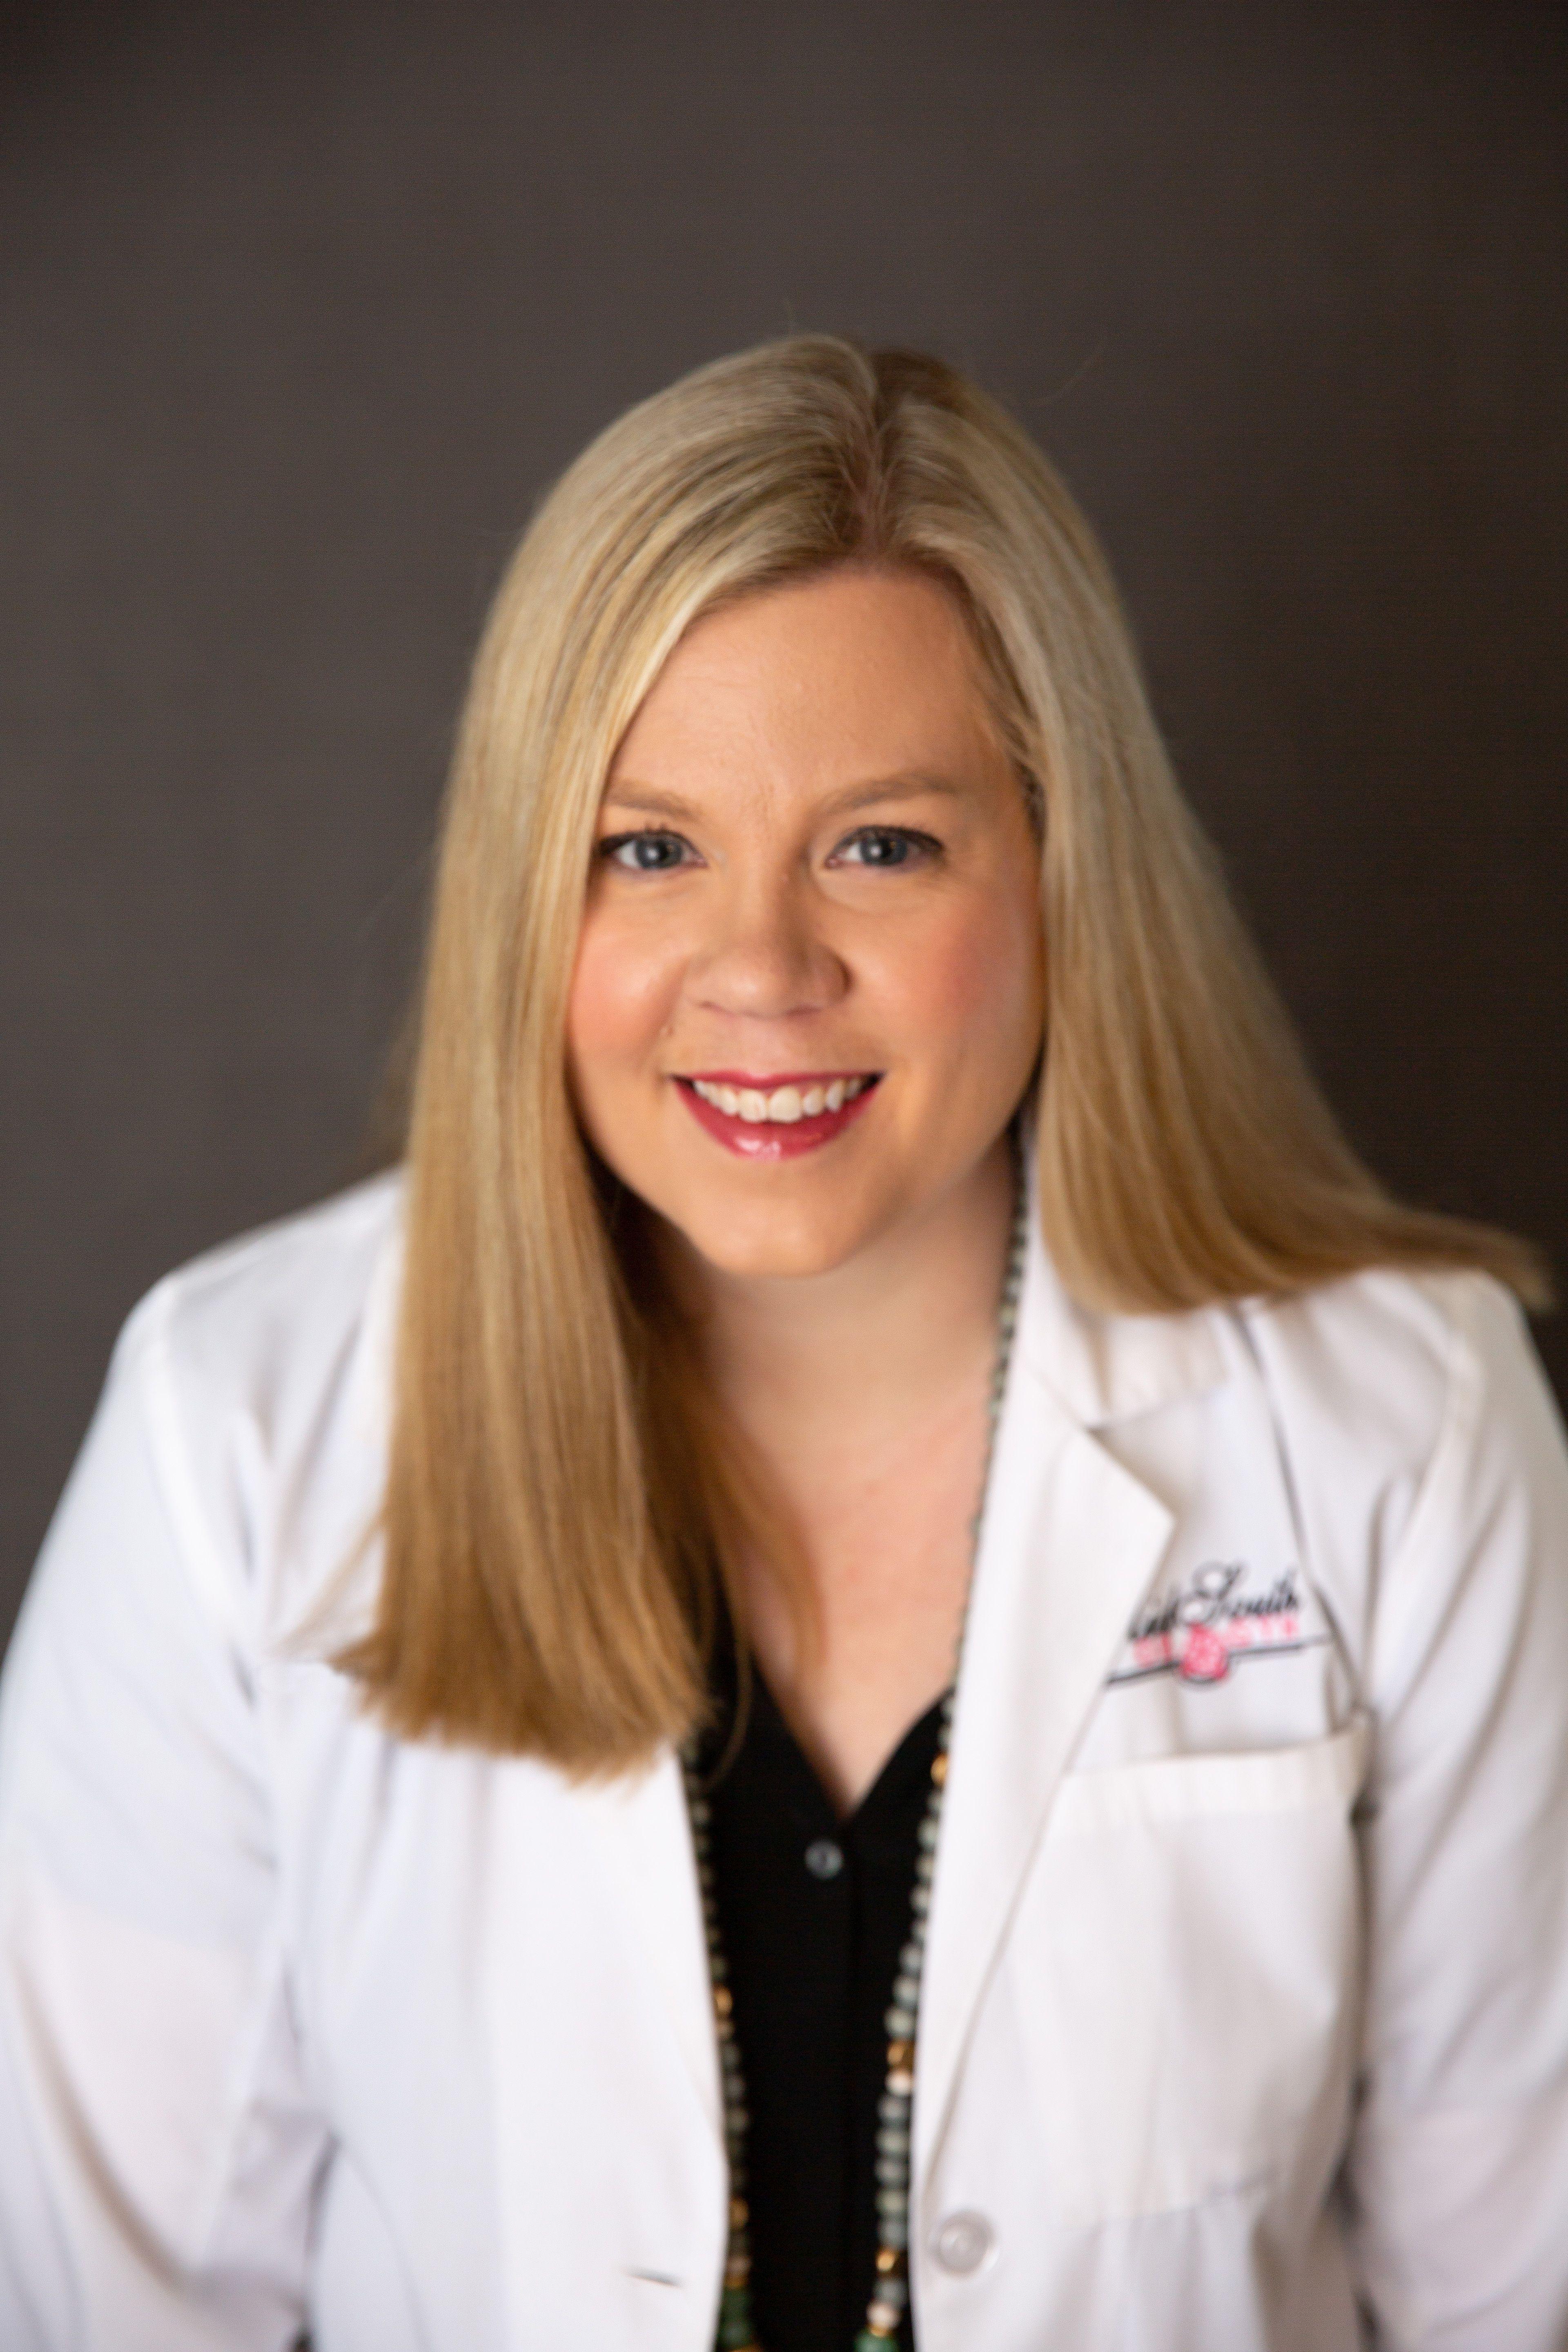 MidSouth ObGyn - Top Gynecologist in Memphis TN Photo